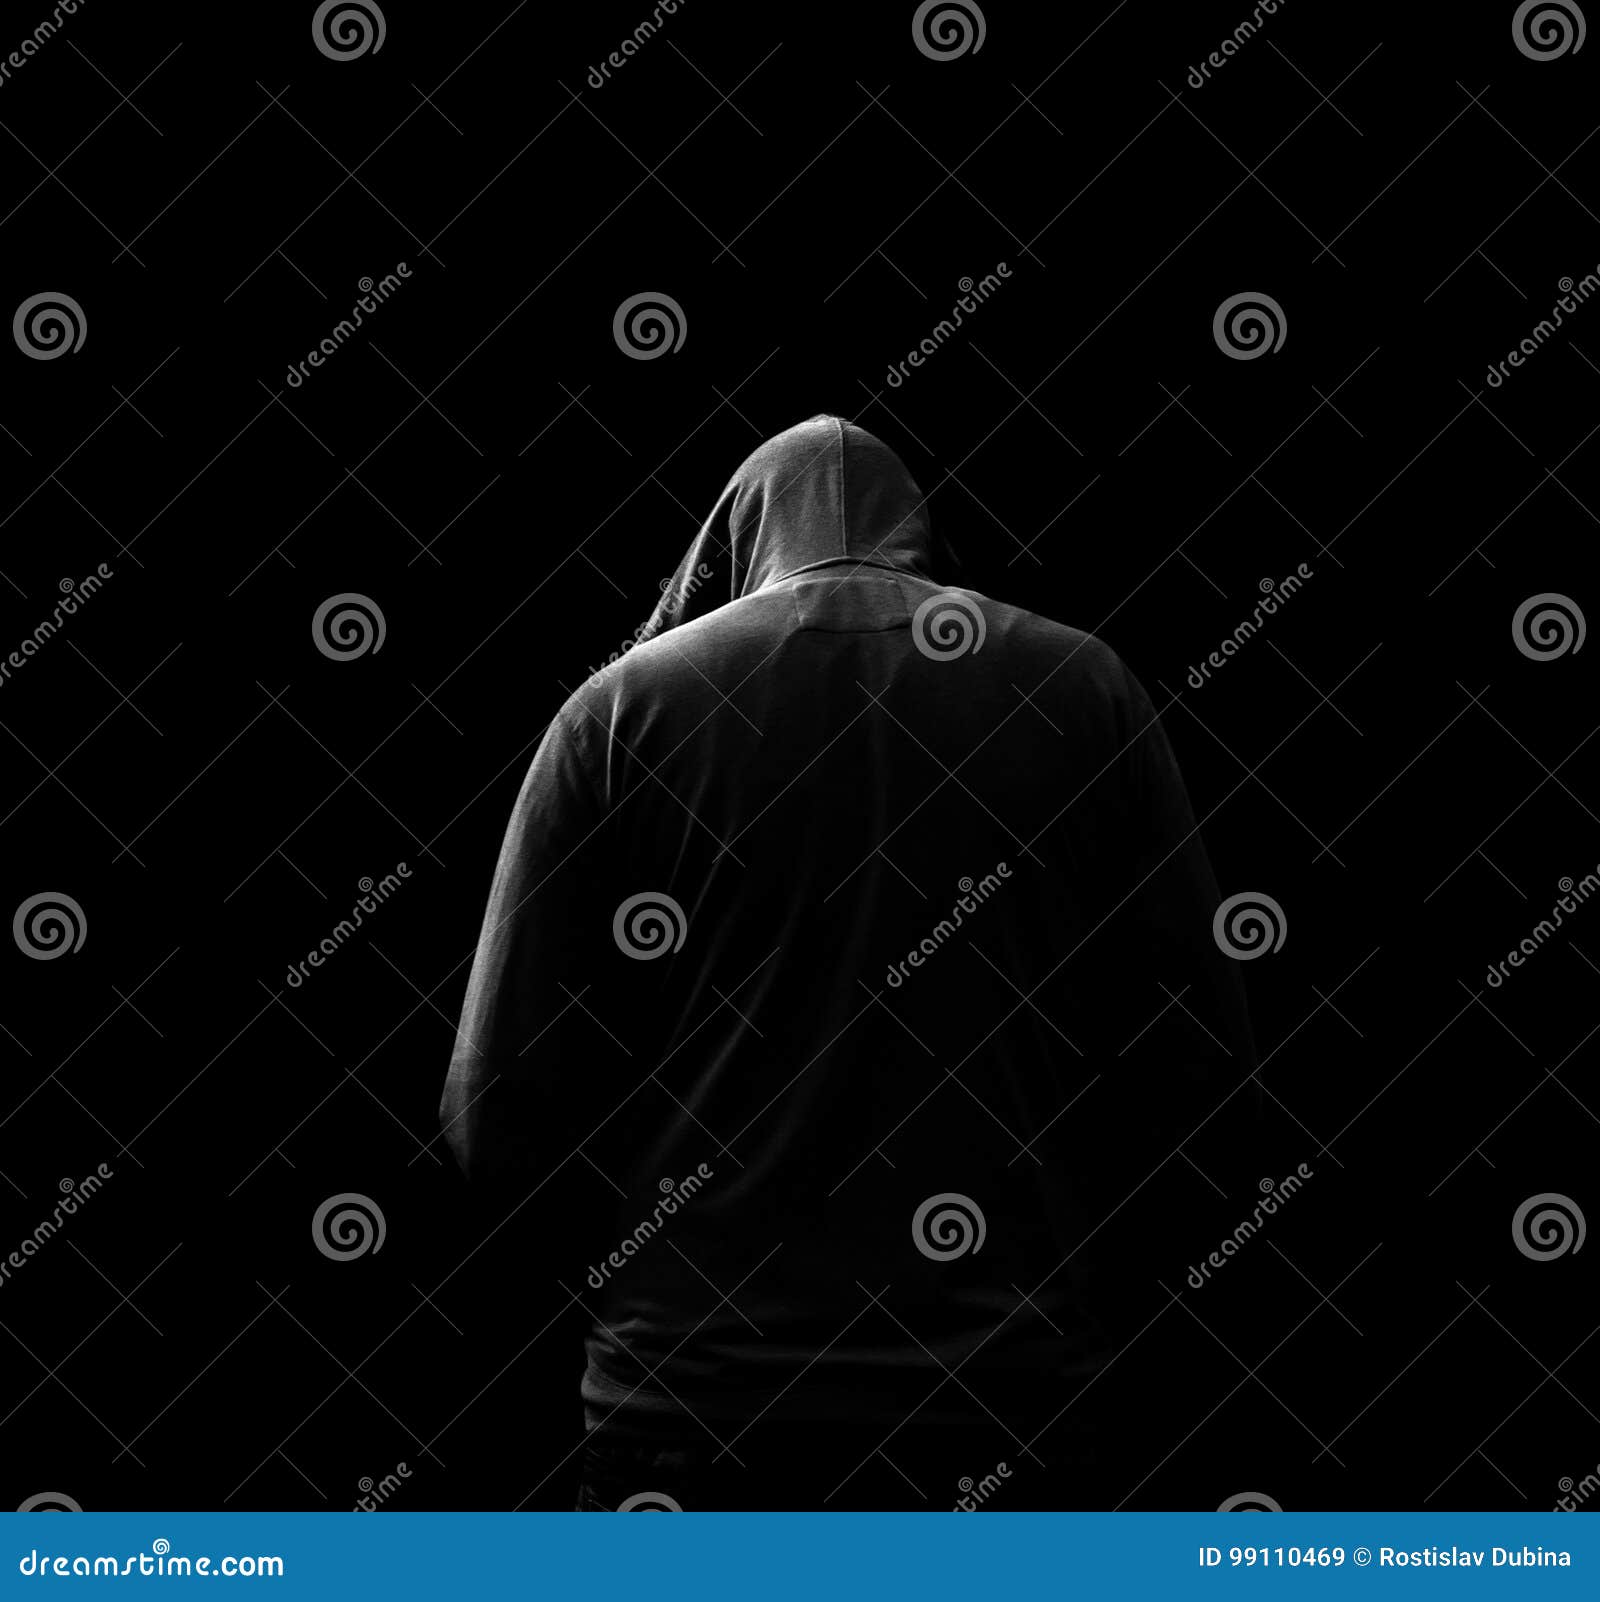 black and white silhouette of a hooded man, who turned away,  on black background.